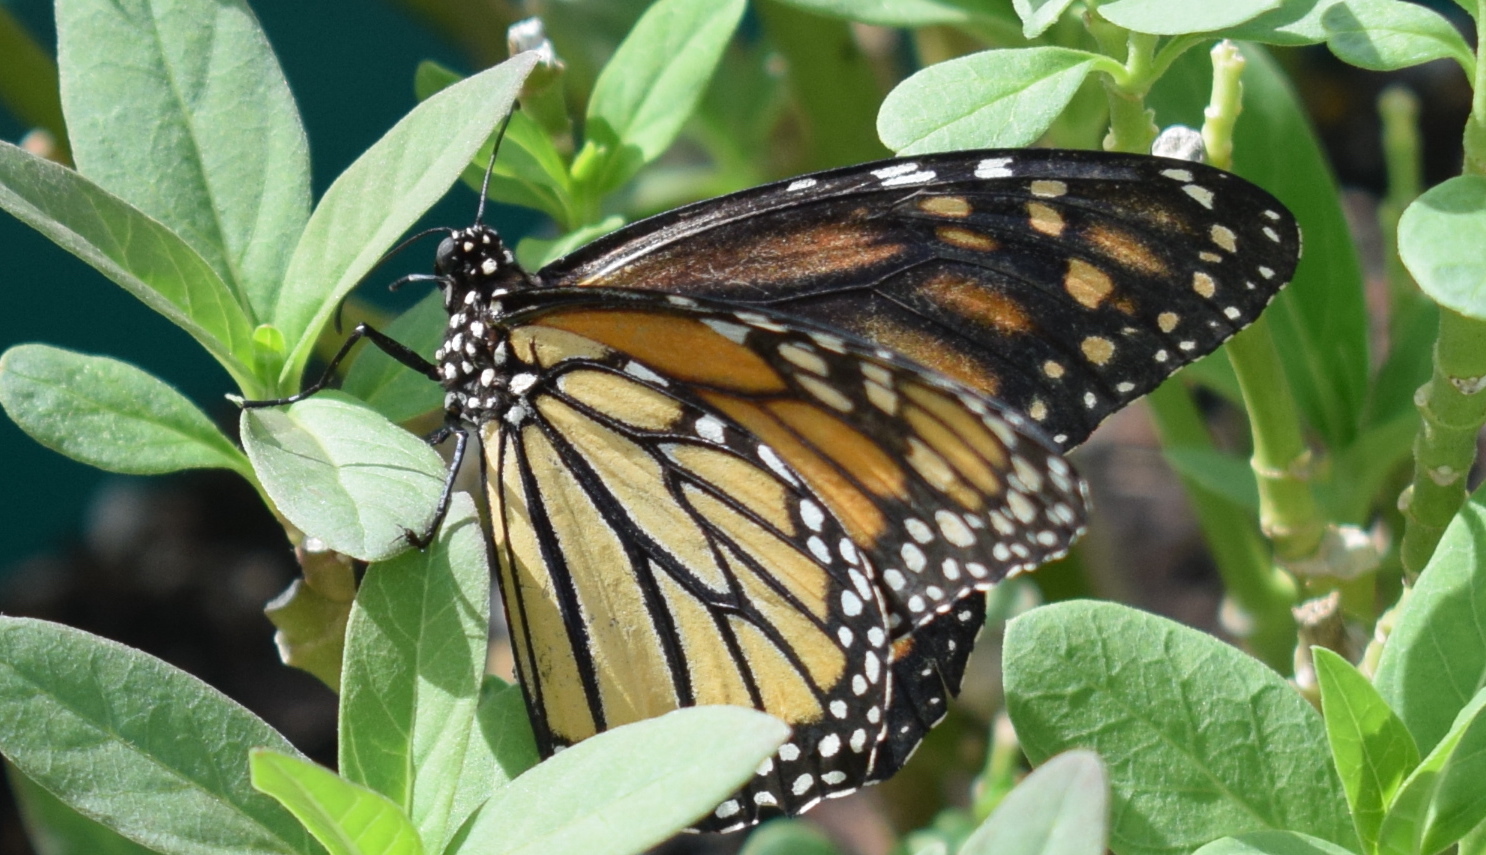 One of the Monarch butterflies raised by Donna and Robert Masters attached to a plant outside their home.